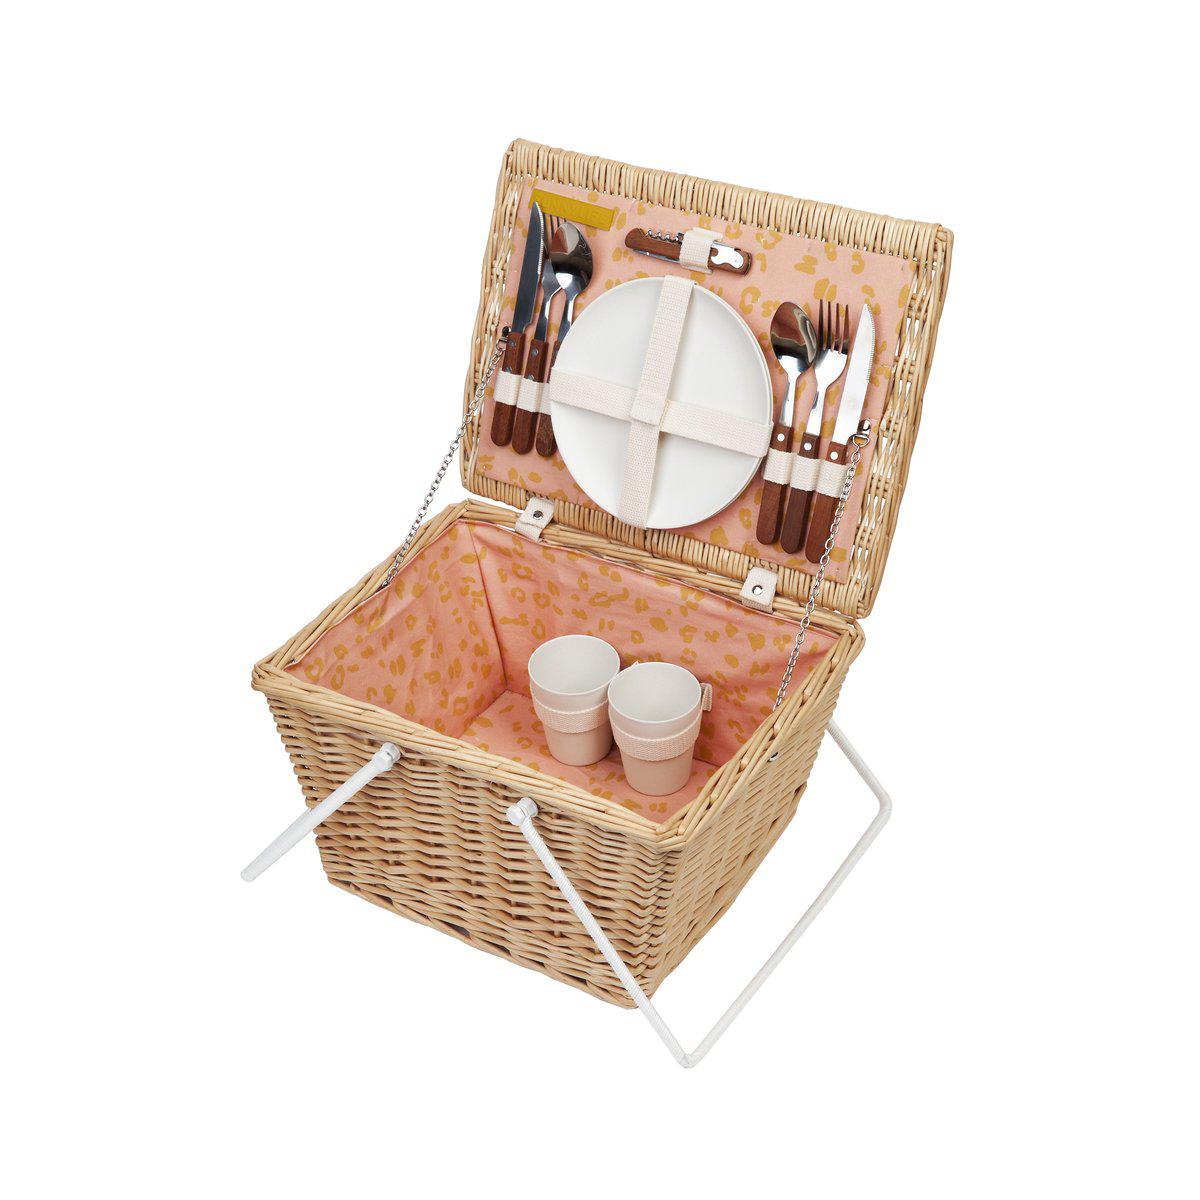 Small Picnic Basket - Call Of The Wild - Peachy Pink-Travel & Outdoors-Sunny Life-The Bay Room